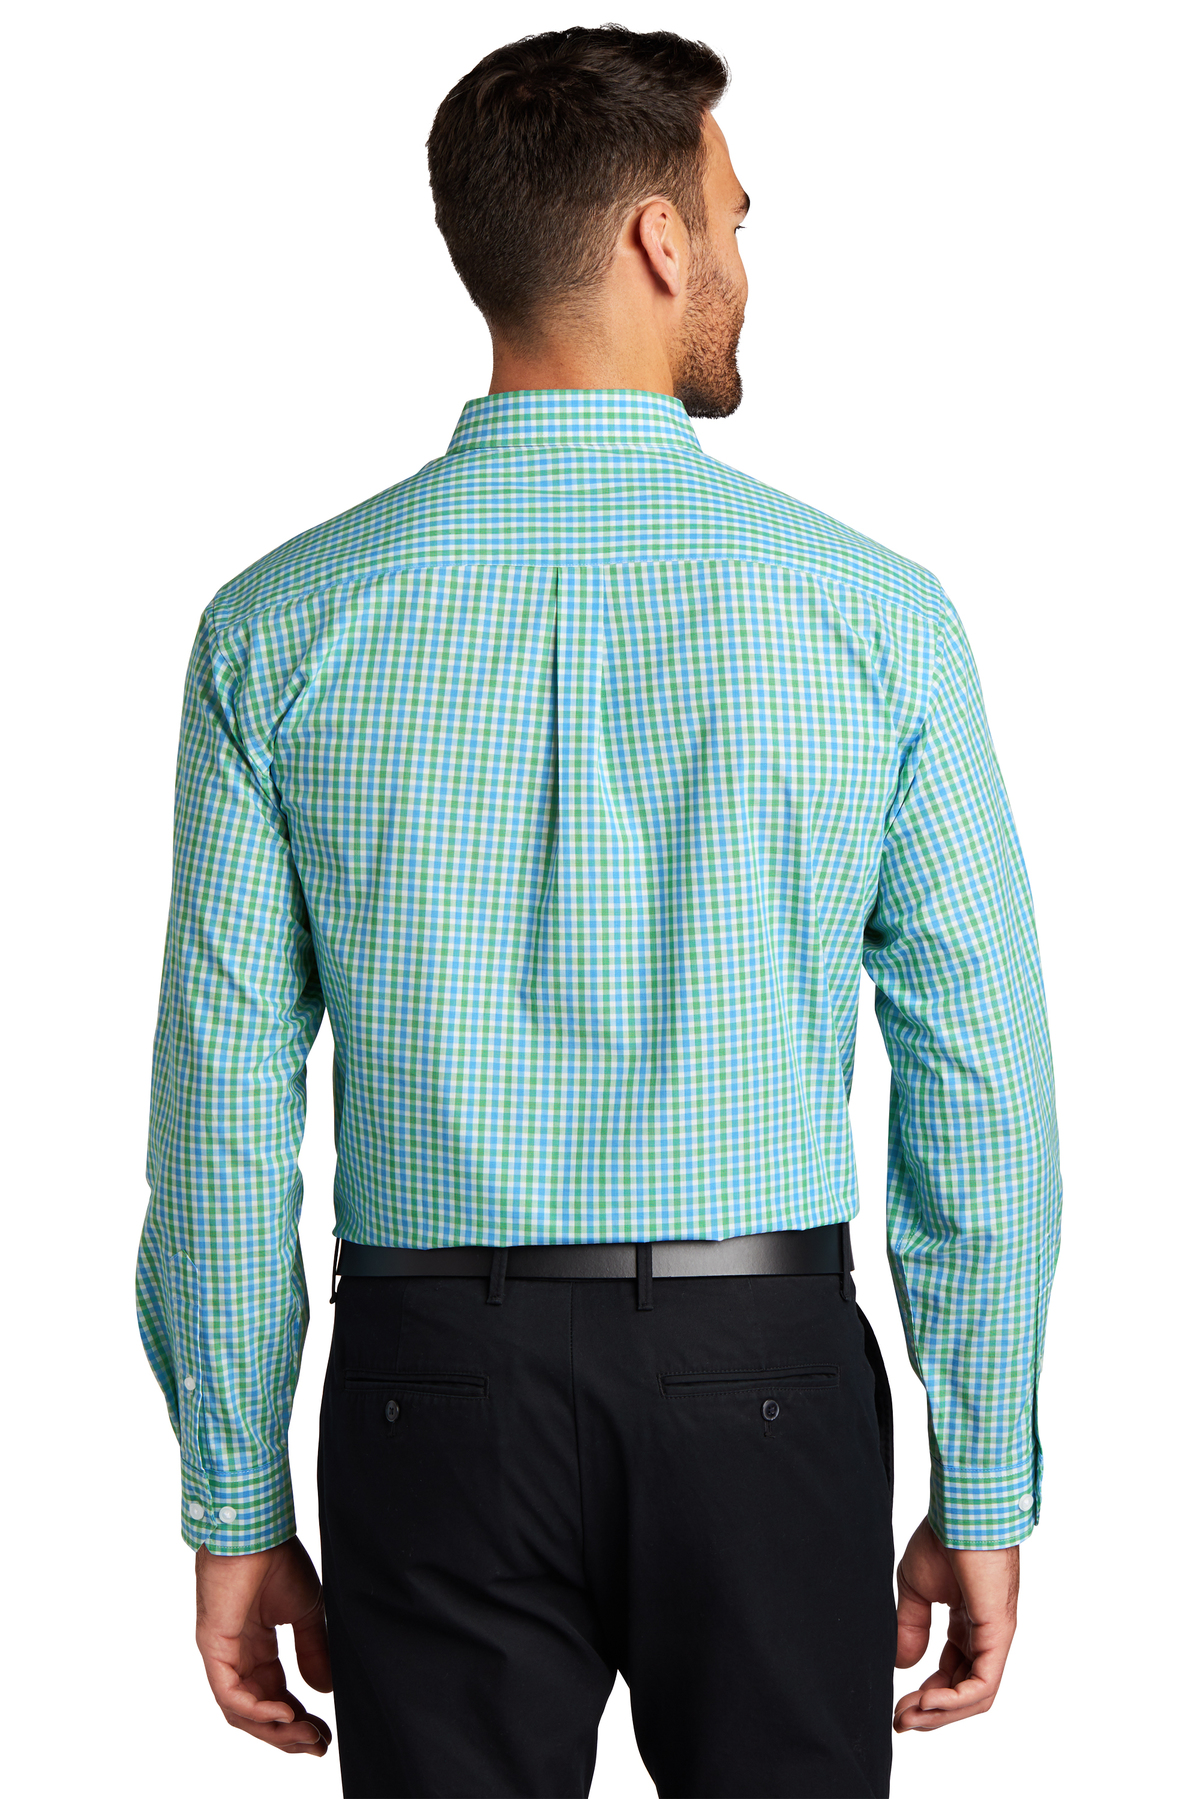 Port Authority Long Sleeve Gingham Easy Care Shirt | Product | Company ...